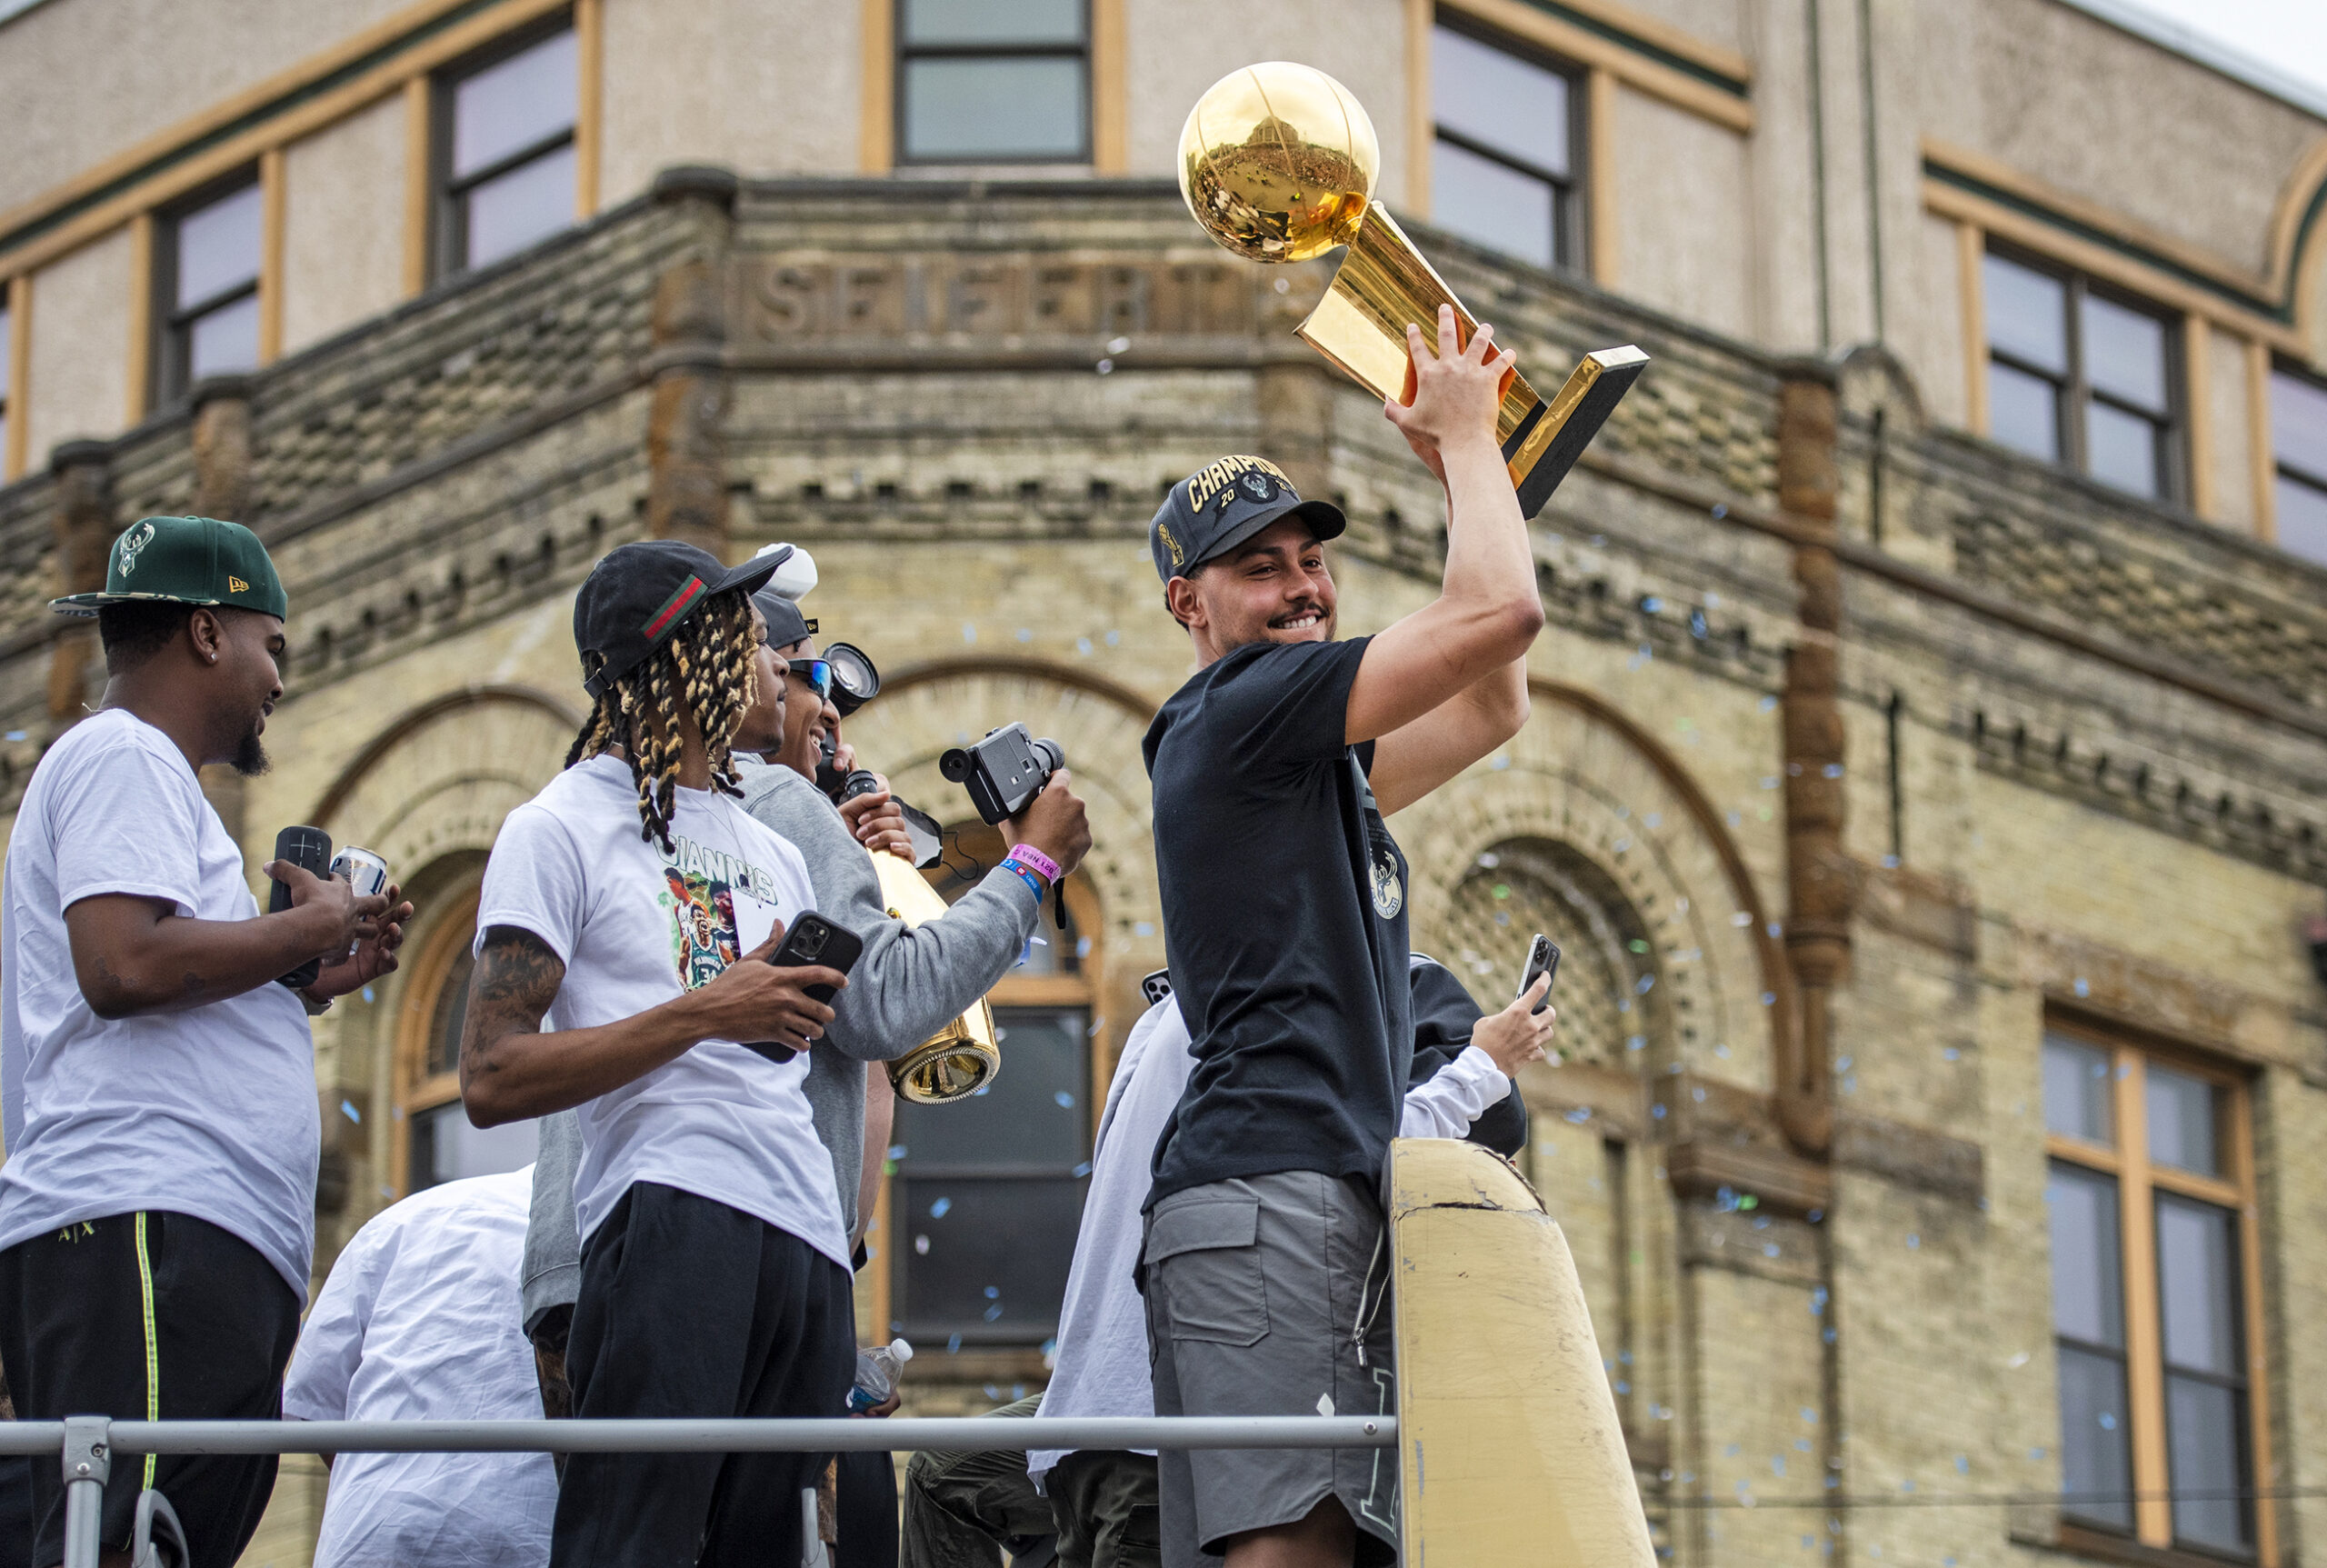 A Bucks player holds the trophy above his head from on top of a bus.